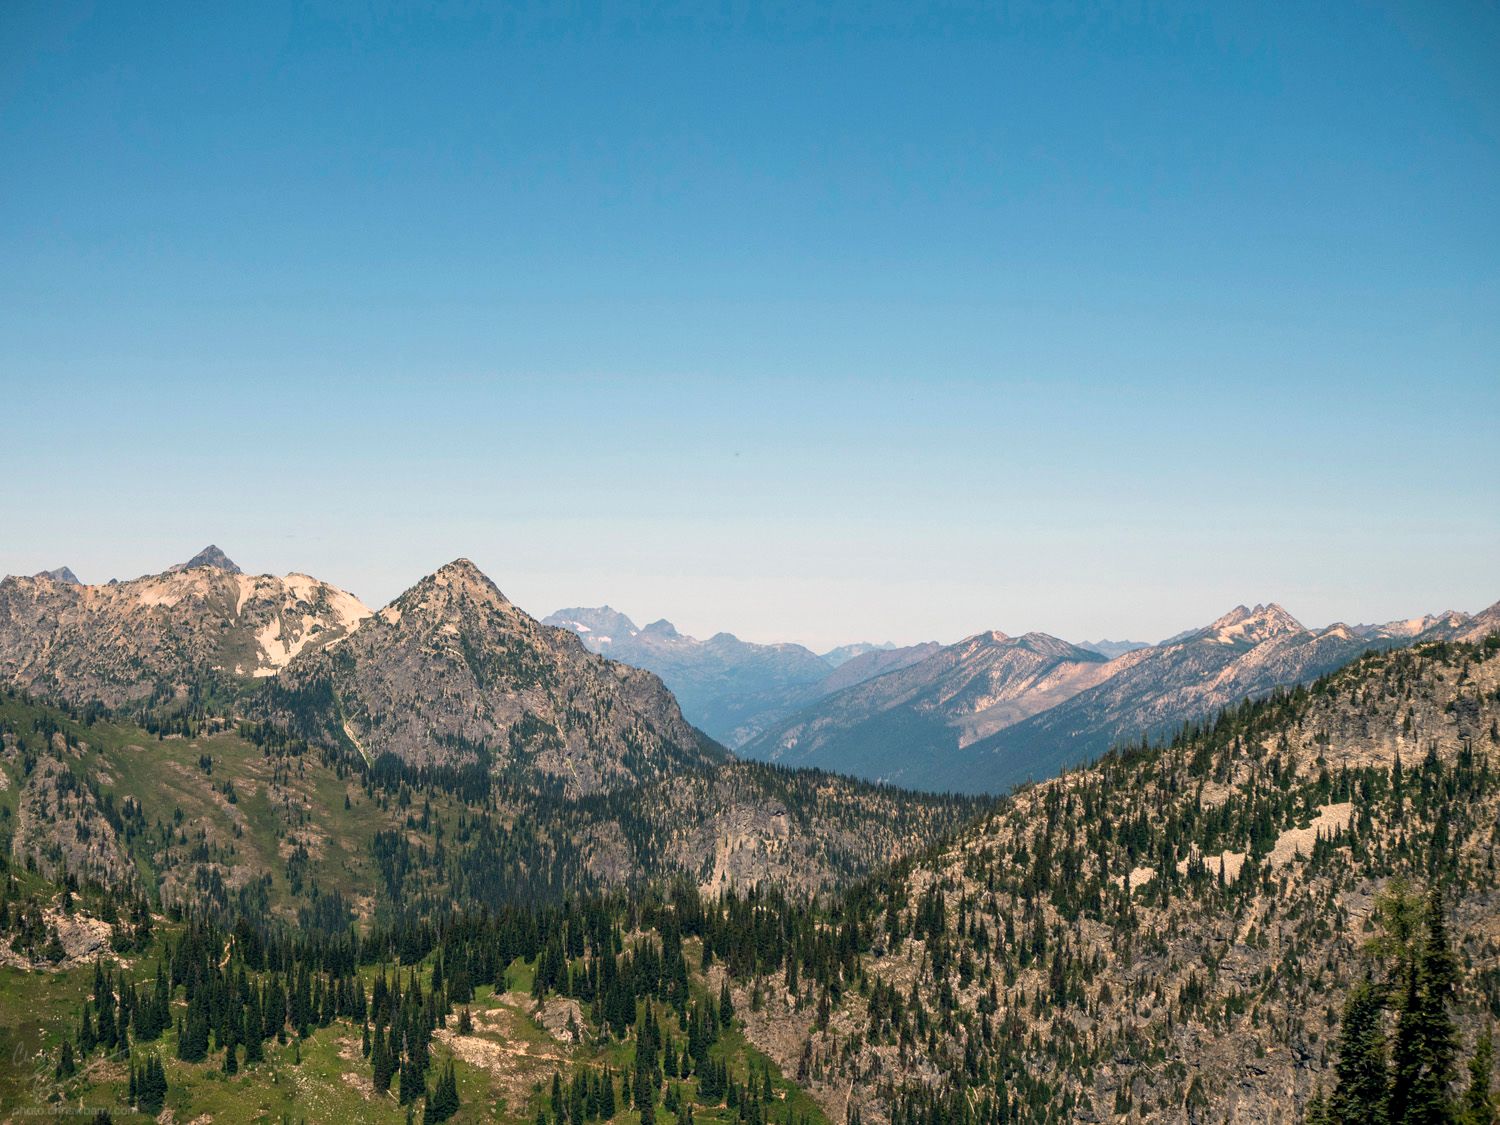 Landscape of Mountains dotted with pine trees, with a clear blue to pale white sky